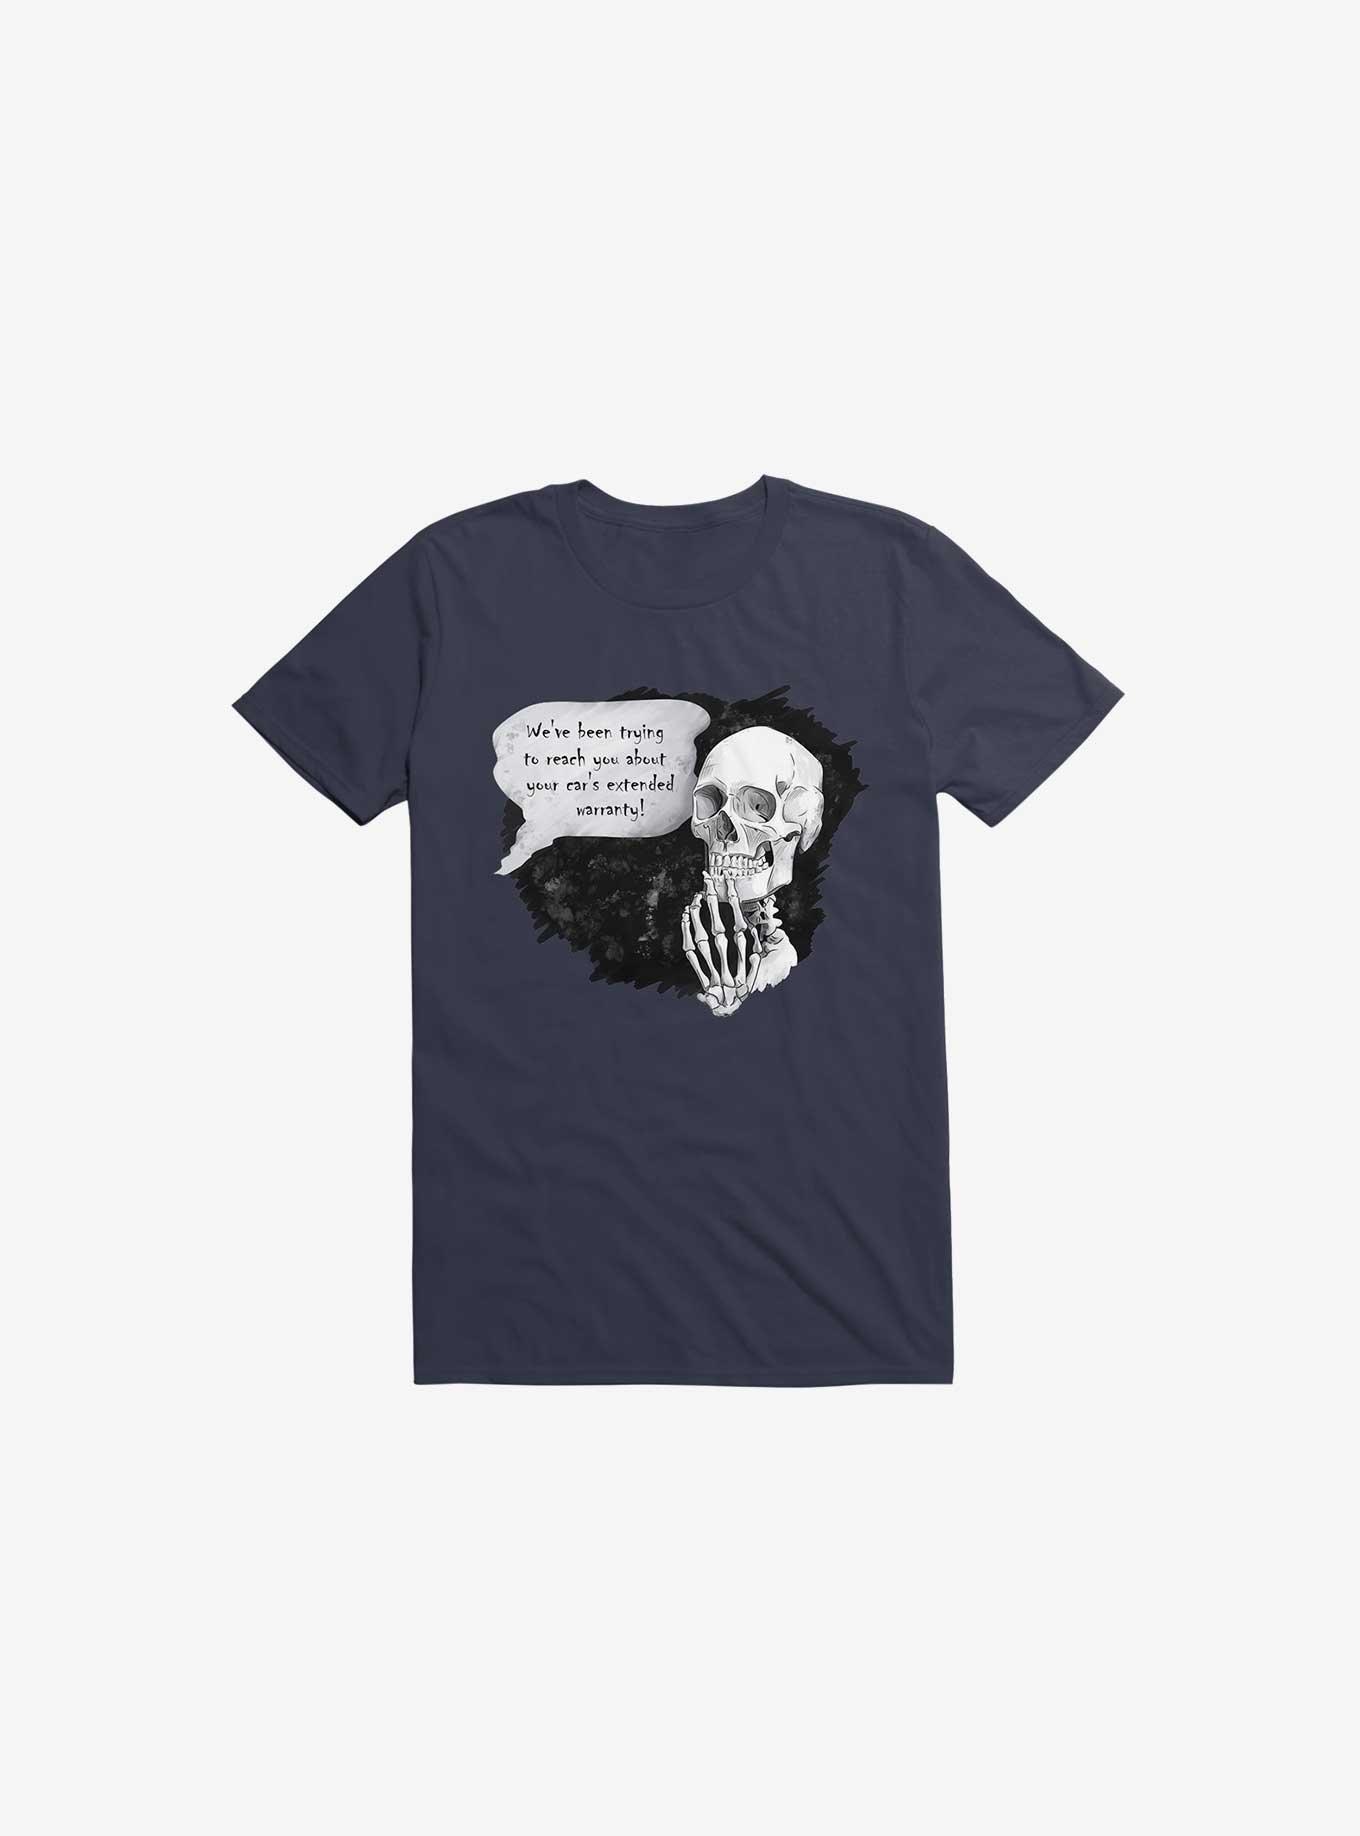 We've been trying to reach you... T-Shirt, NAVY, hi-res